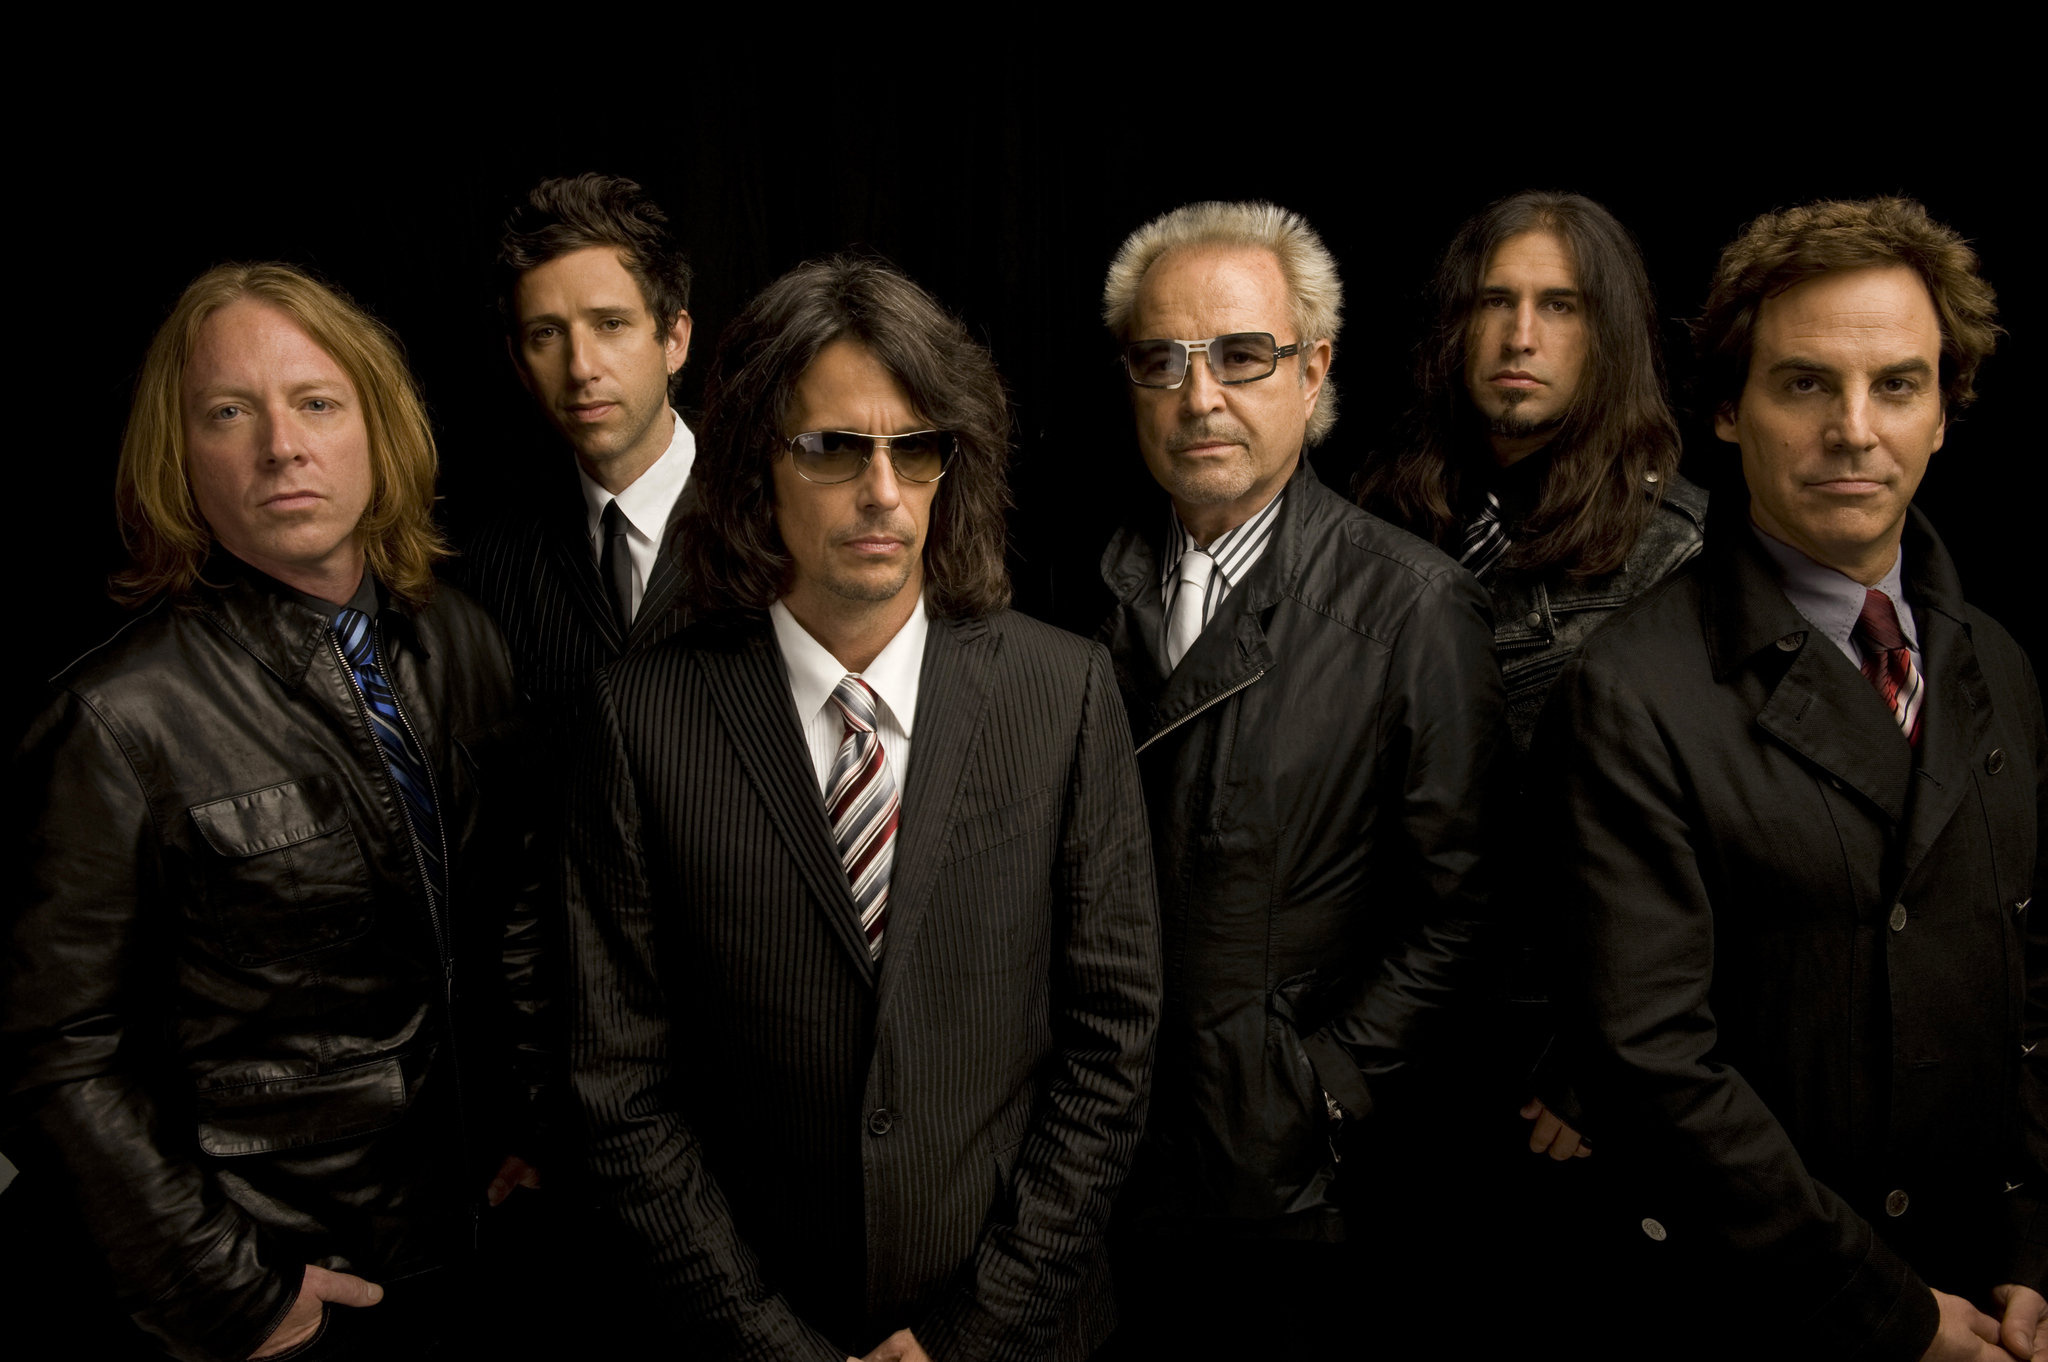 Foreigner band, Legendary music moments, HQ wallpapers, Captivating 4K images, 2050x1370 HD Desktop